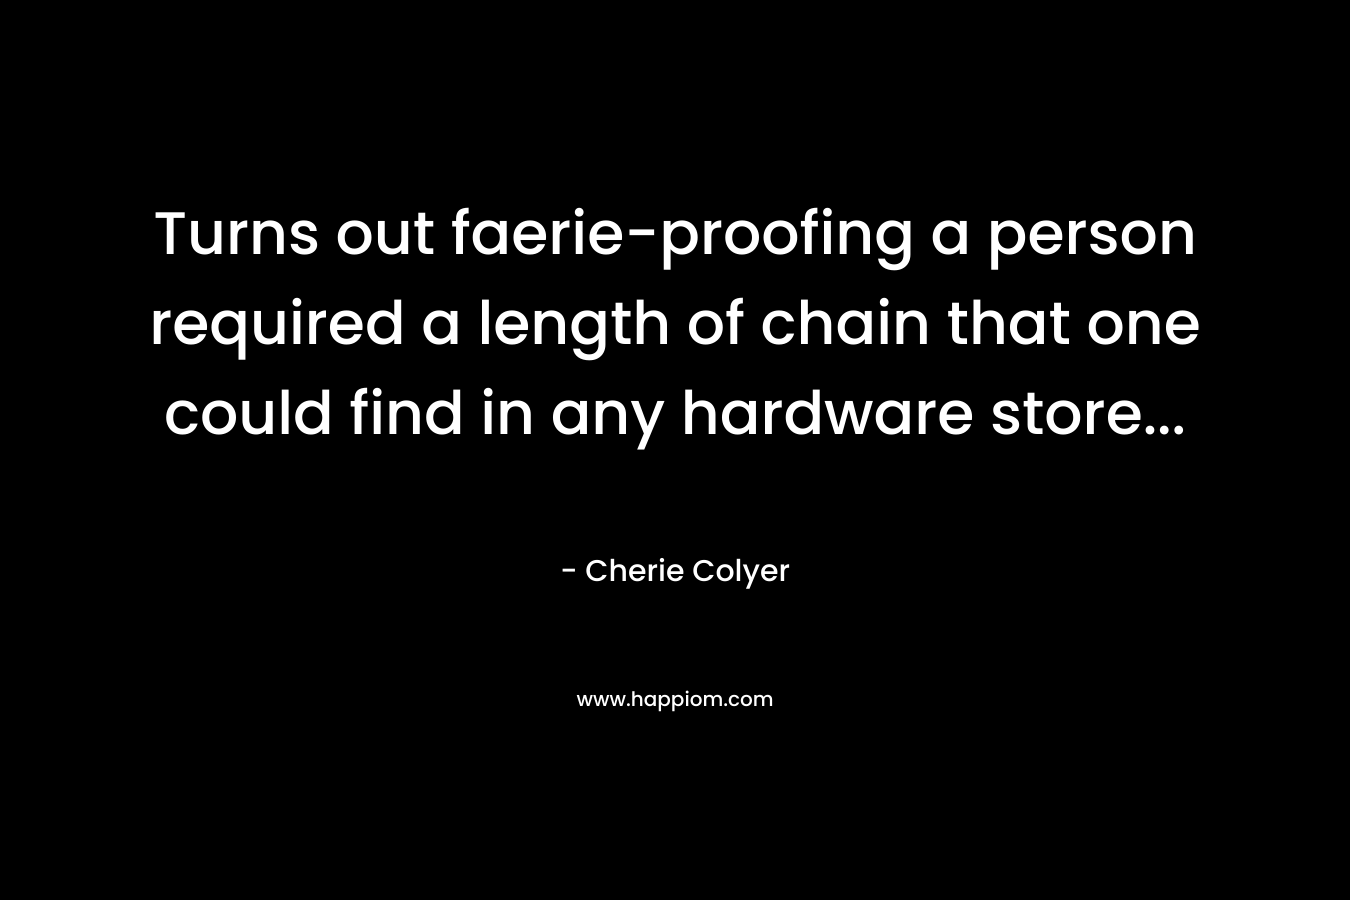 Turns out faerie-proofing a person required a length of chain that one could find in any hardware store… – Cherie Colyer